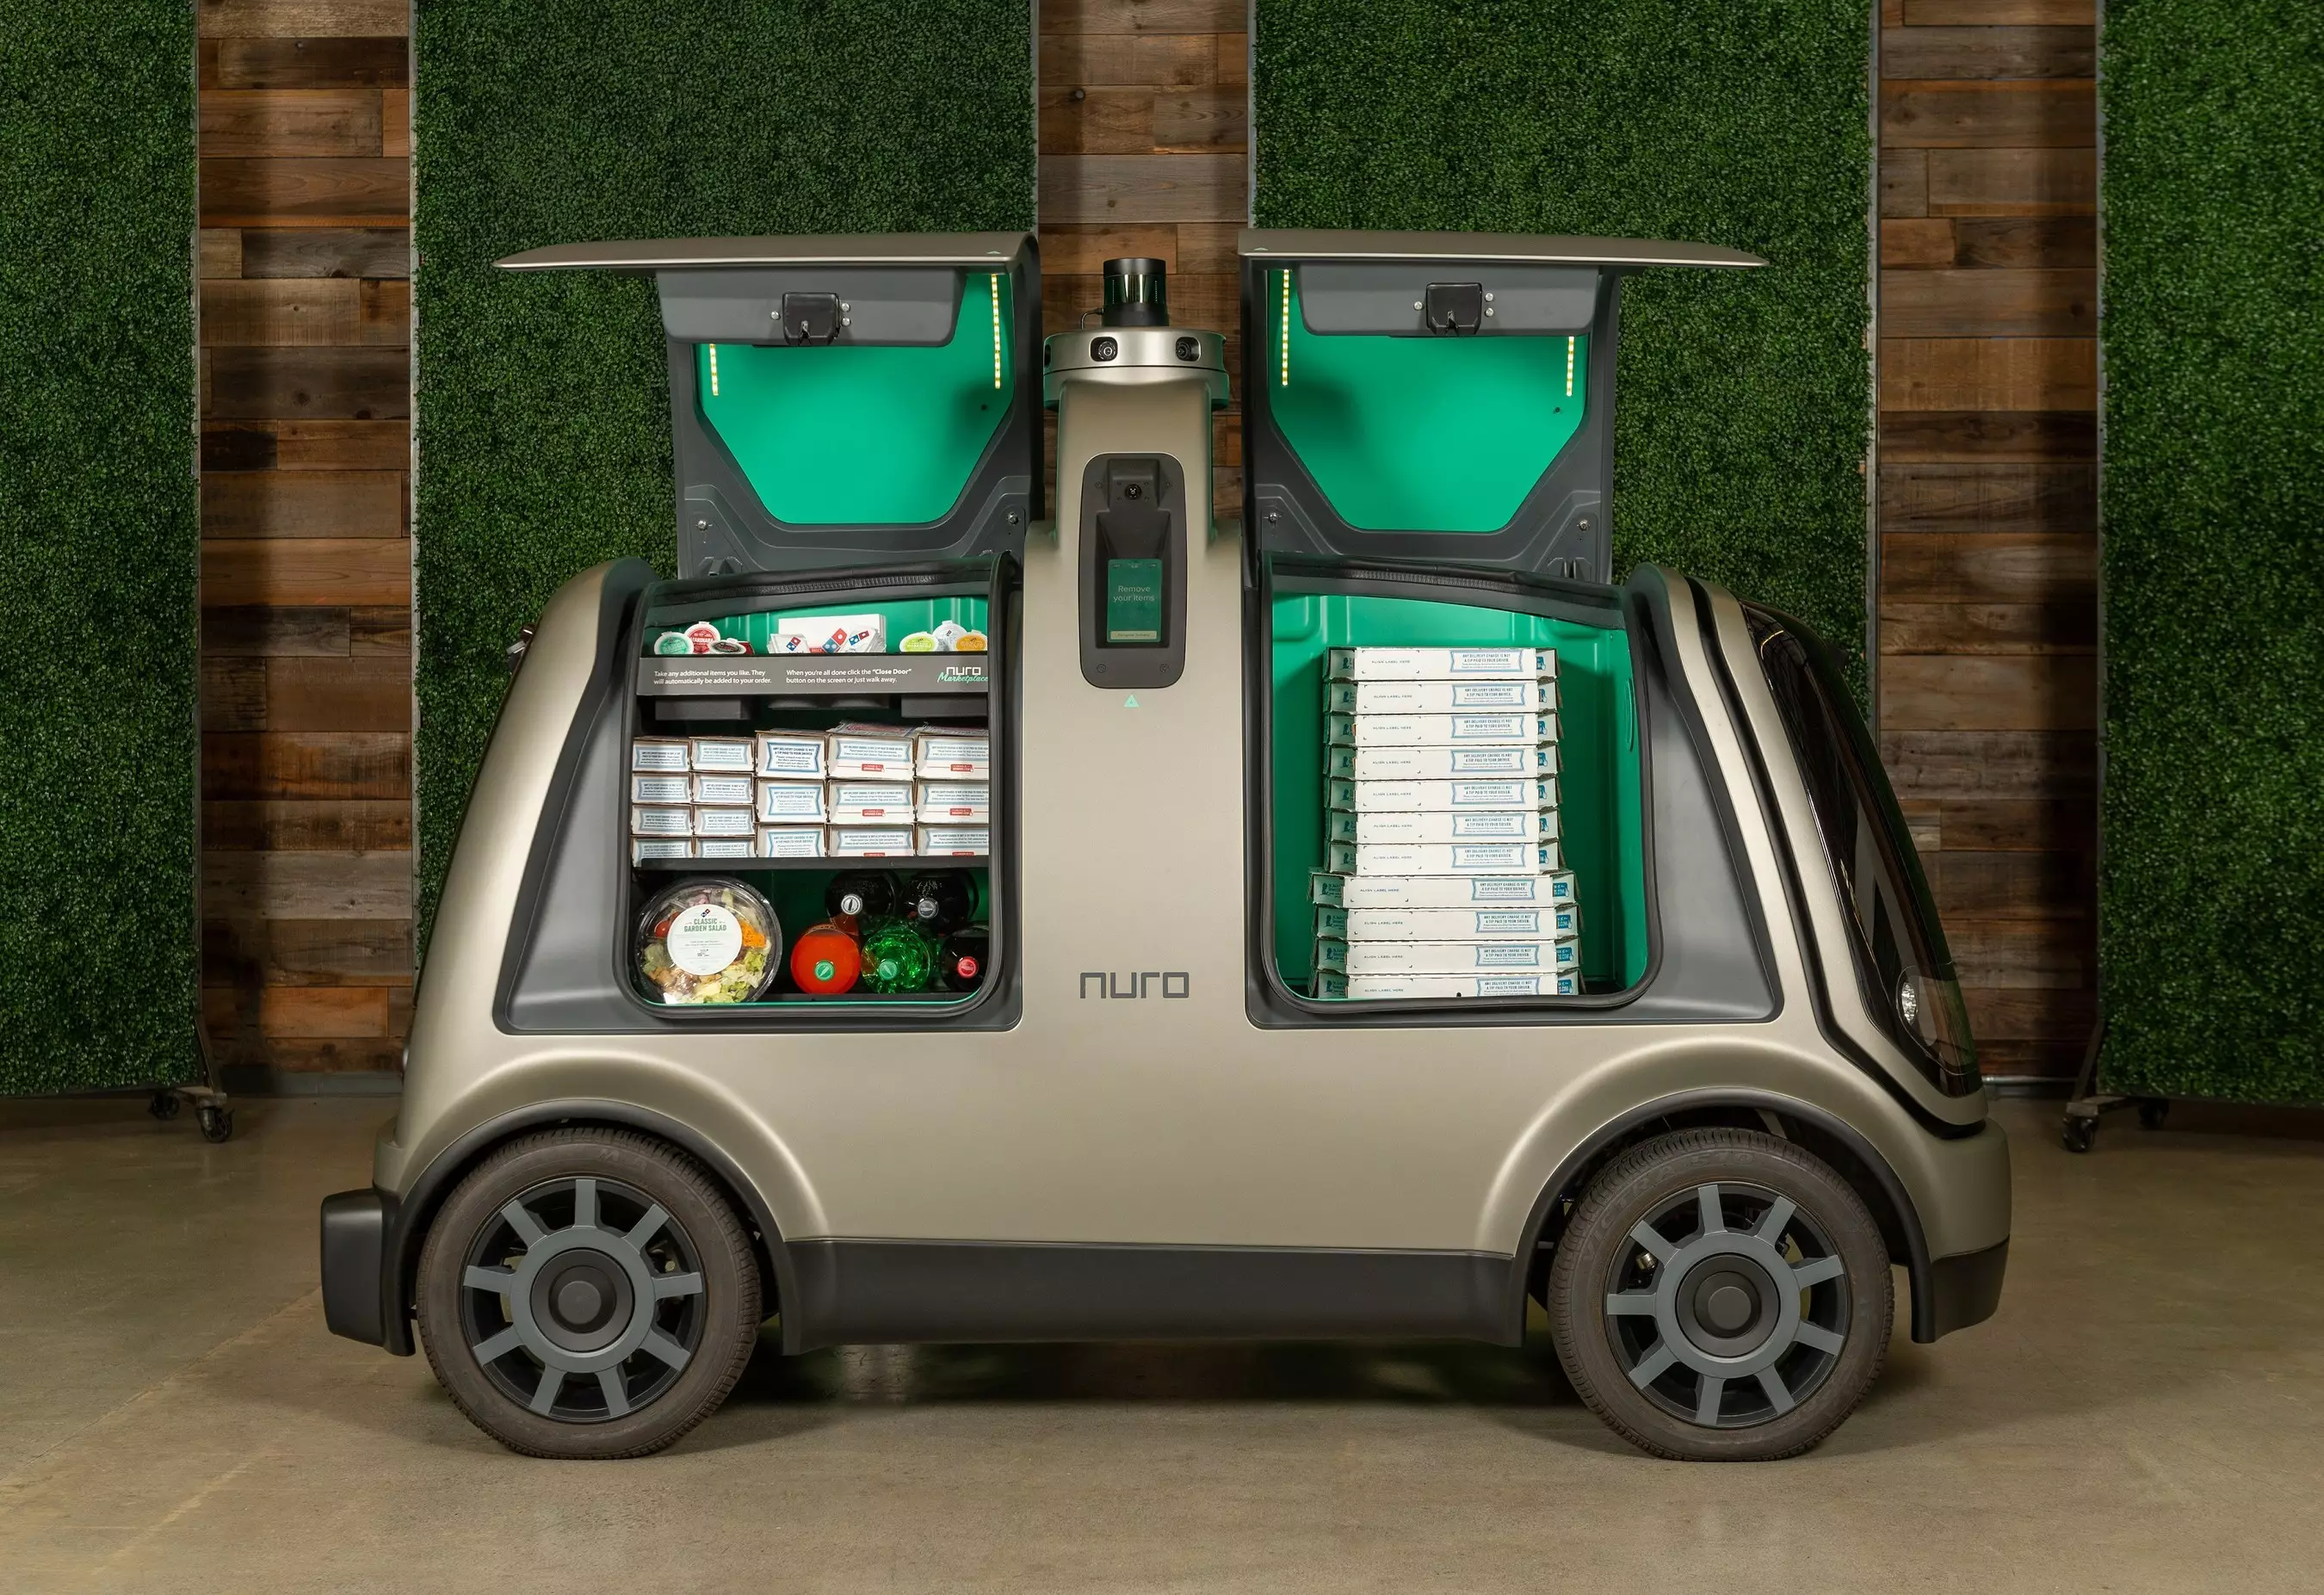 Domino's and Nuro are joining forces on autonomous pizza delivery using the custom unmanned vehicle known as the R2.